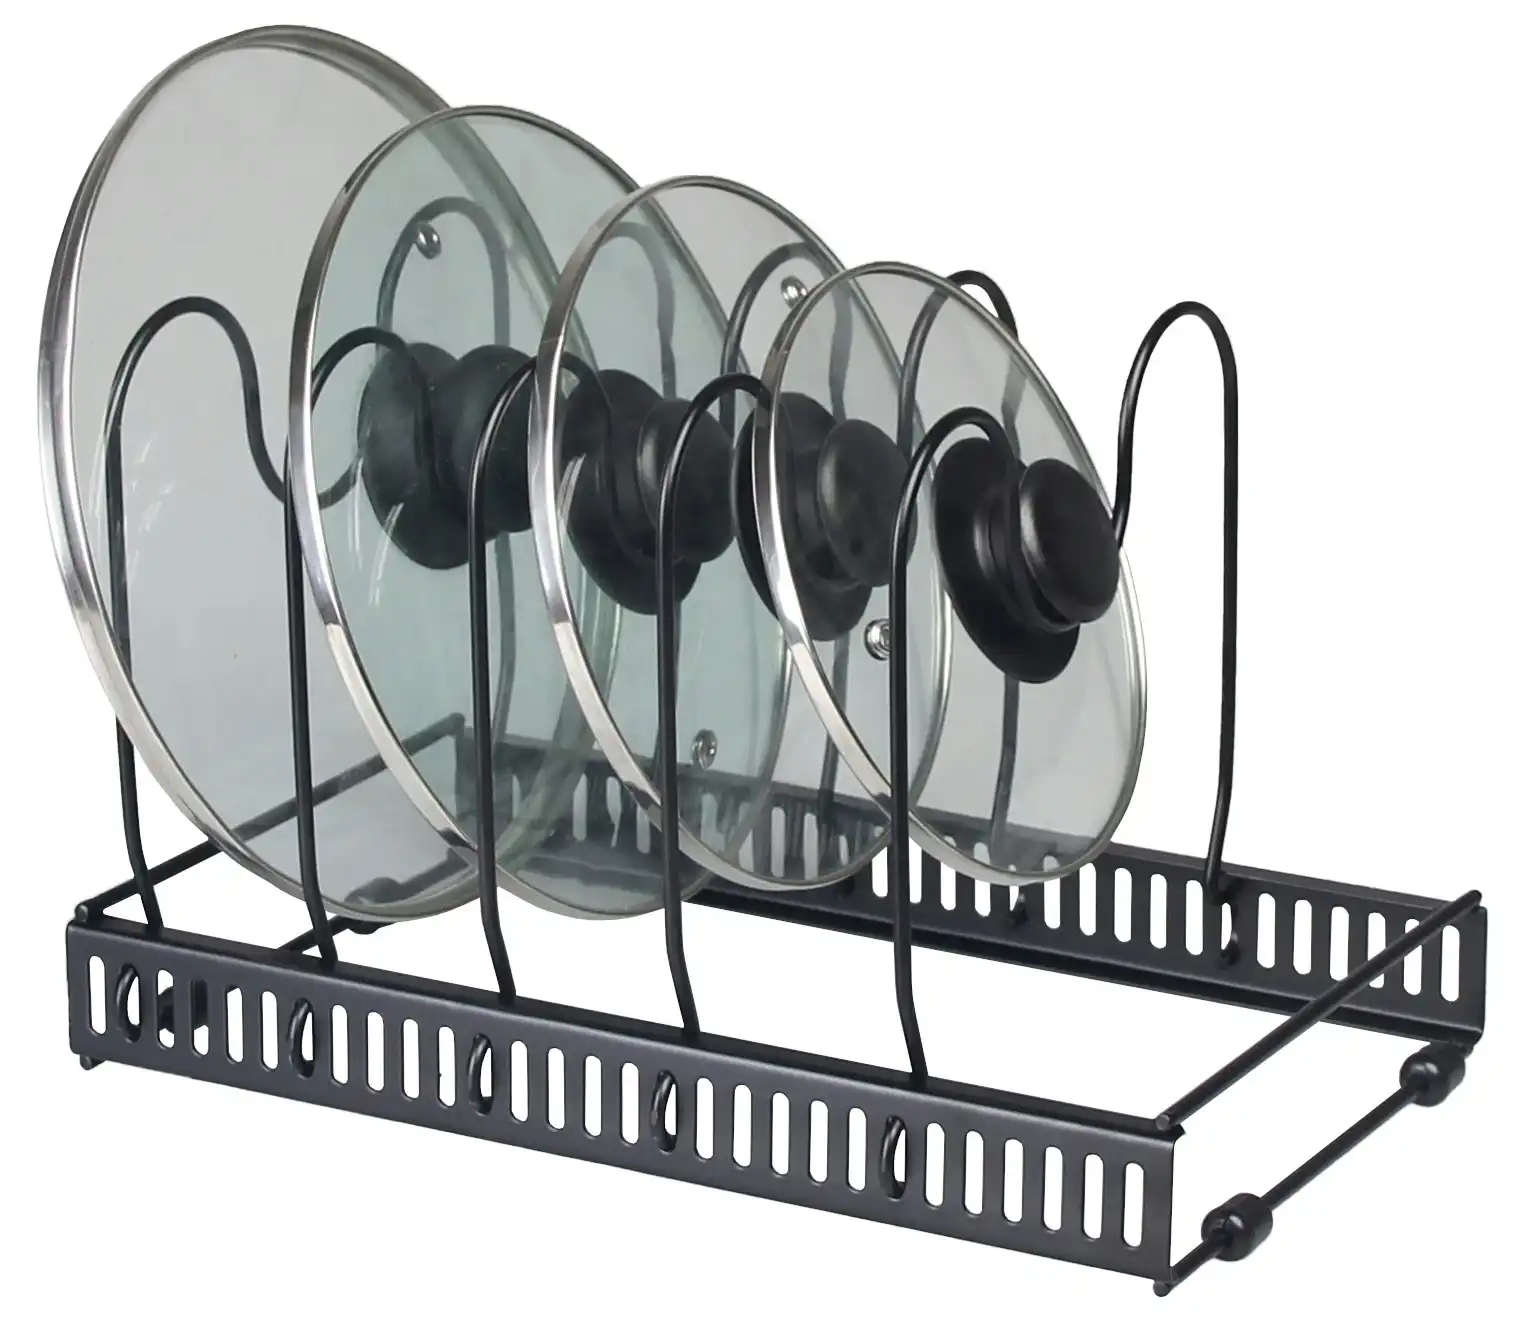 The Kitchen Galleria Expandable Cookware Rack / Organiser